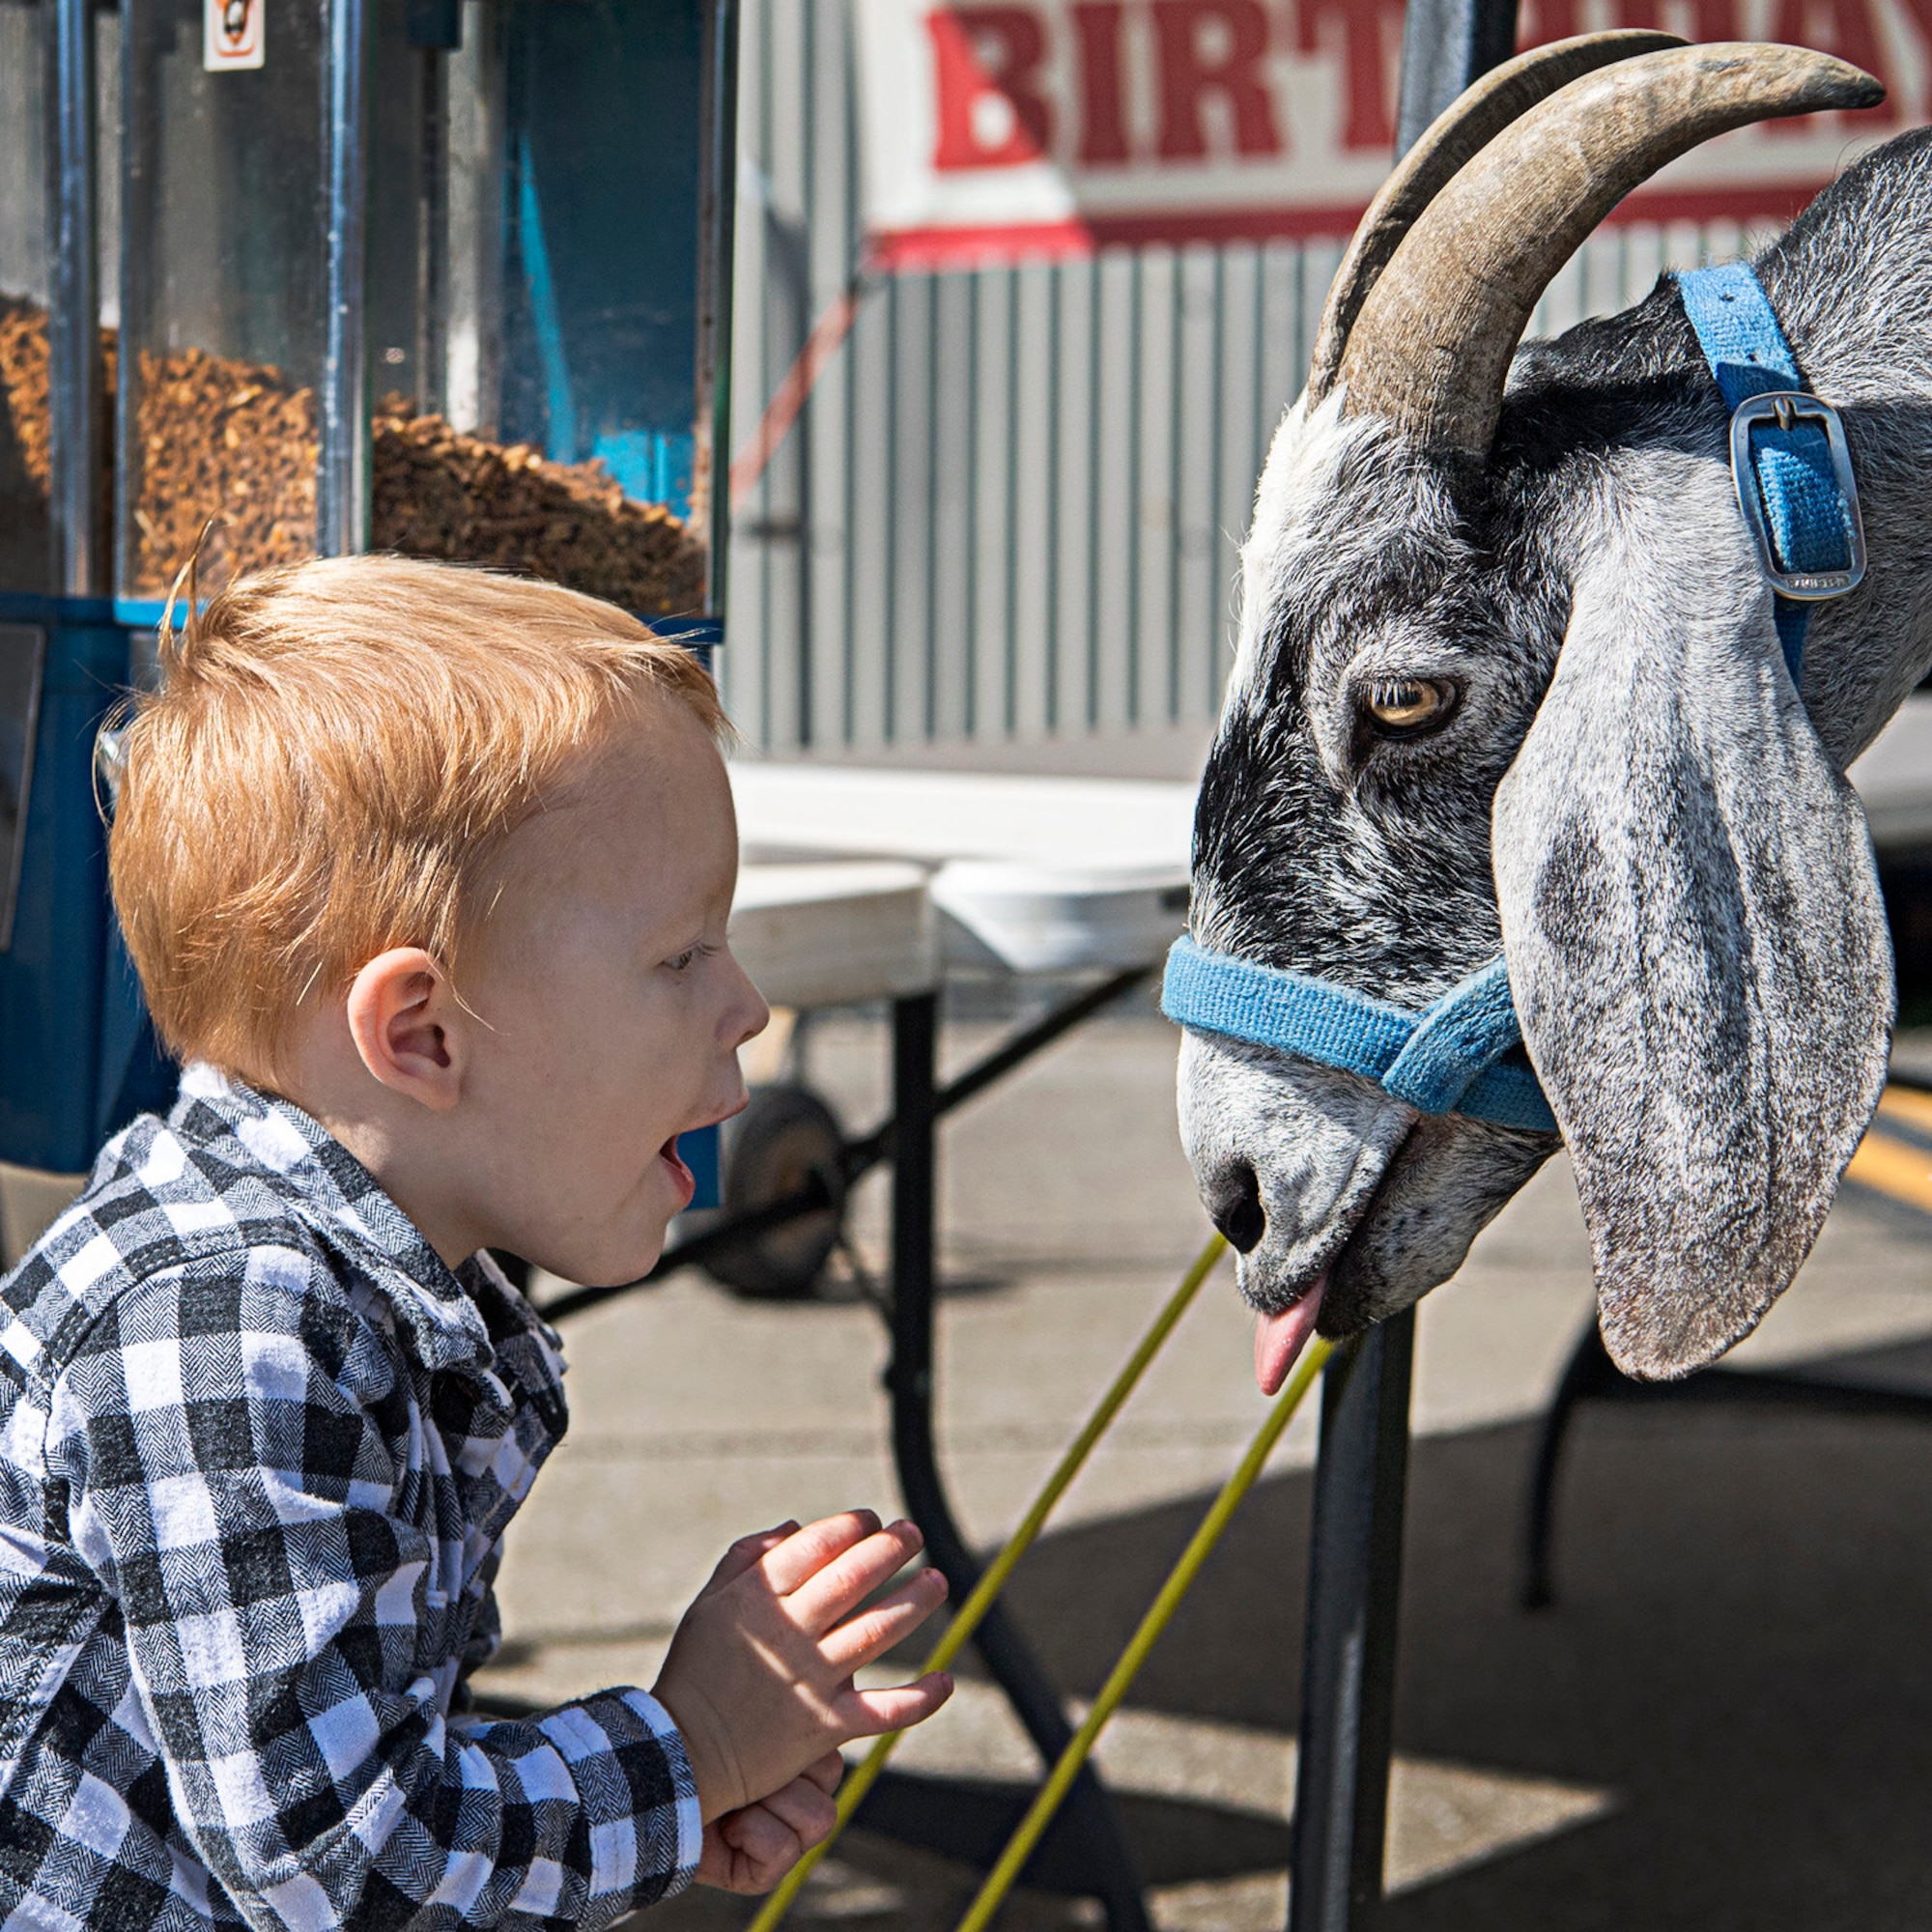 Austin Zaremba, son of Tech. Sgt. Anna Zaremba, 434th Aerospace Medicine Squadron, tries talking to a goat Oct. 5, 2019 during a fall festival at Grissom Air Reserve Base, Indiana. The festival gave unit members and their families an opportunity to throttle back after a busy year of deployments, exercises, inspections and an airshow. (U.S. Air Force photo/Douglas Hays)